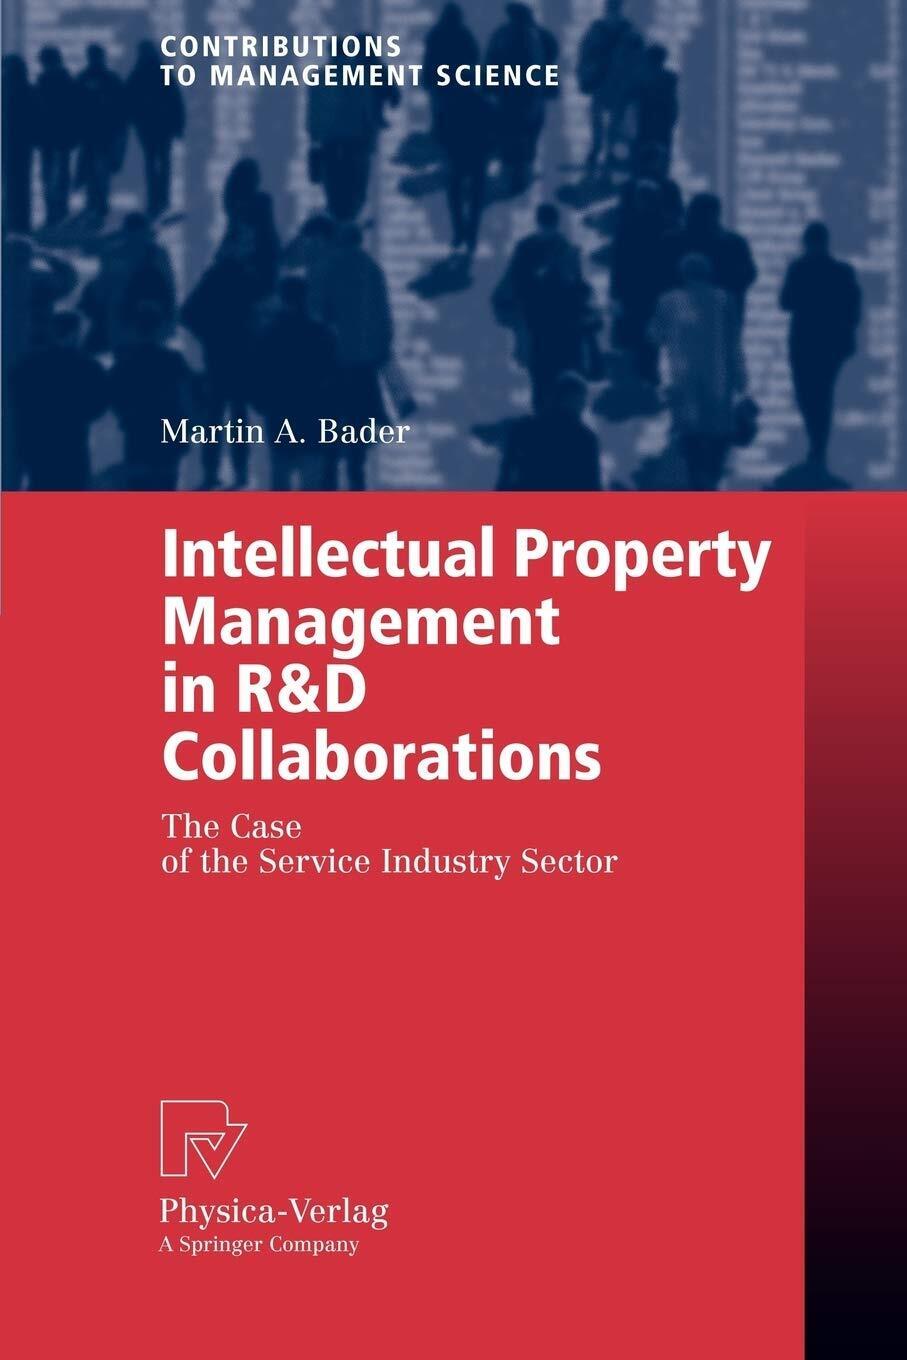 Intellectual Property Management in R&D Collaborations - Martin A. Bader - 2009 libro usato